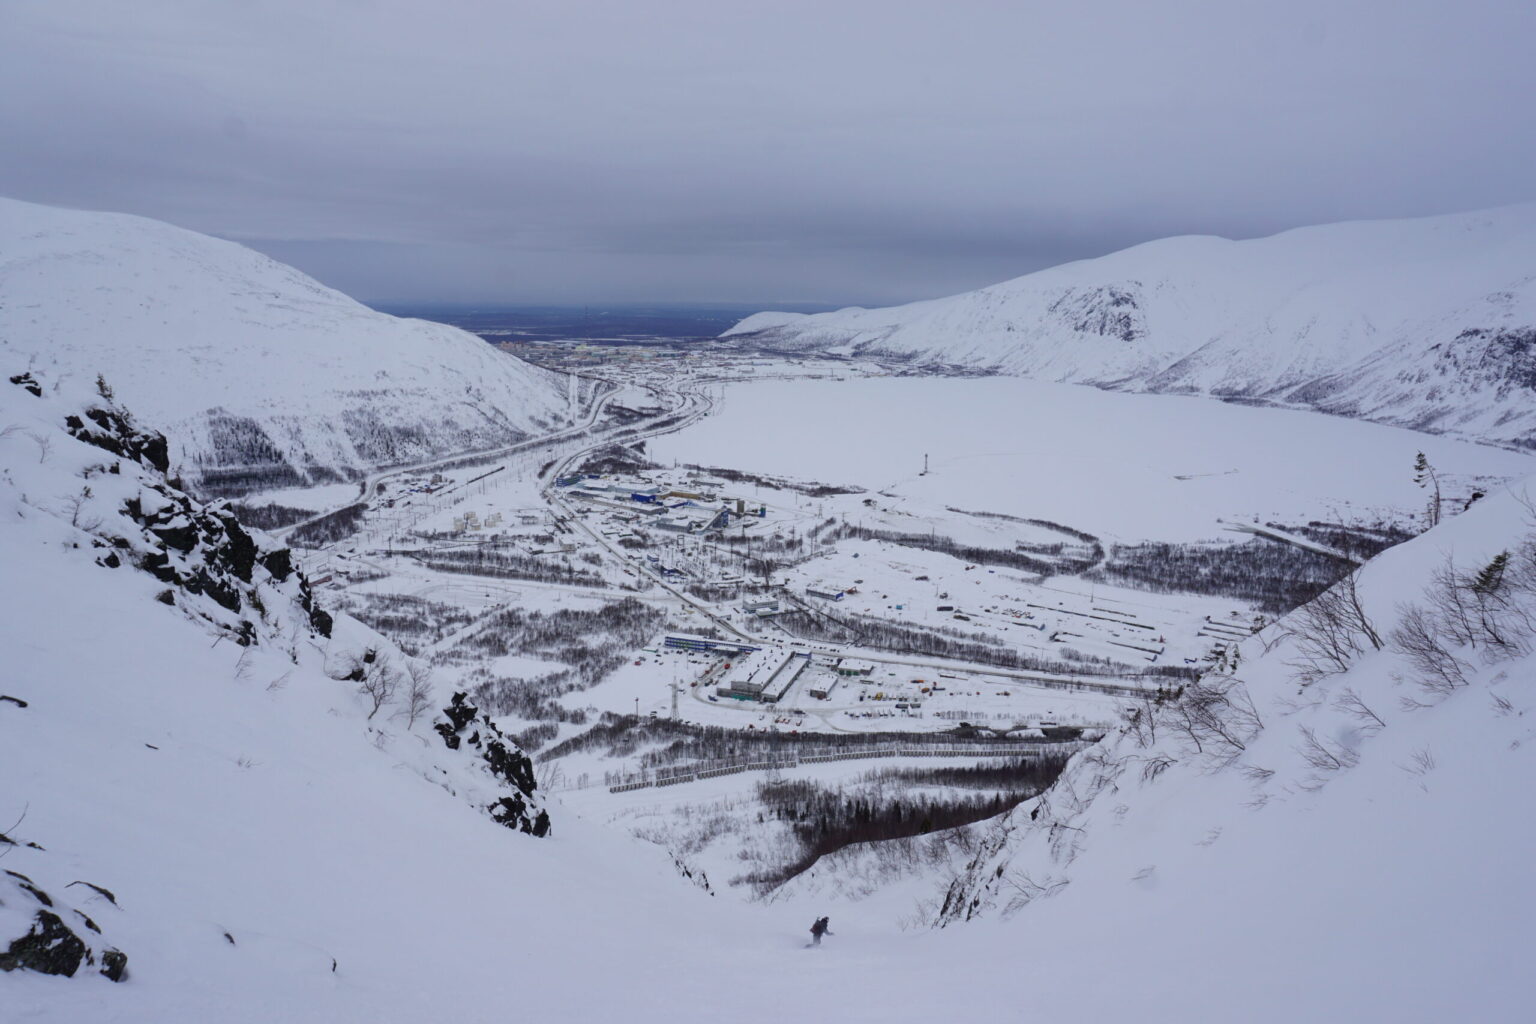 Snowboarding down Mount Juksporr in the Khibiny Mountains of Russia